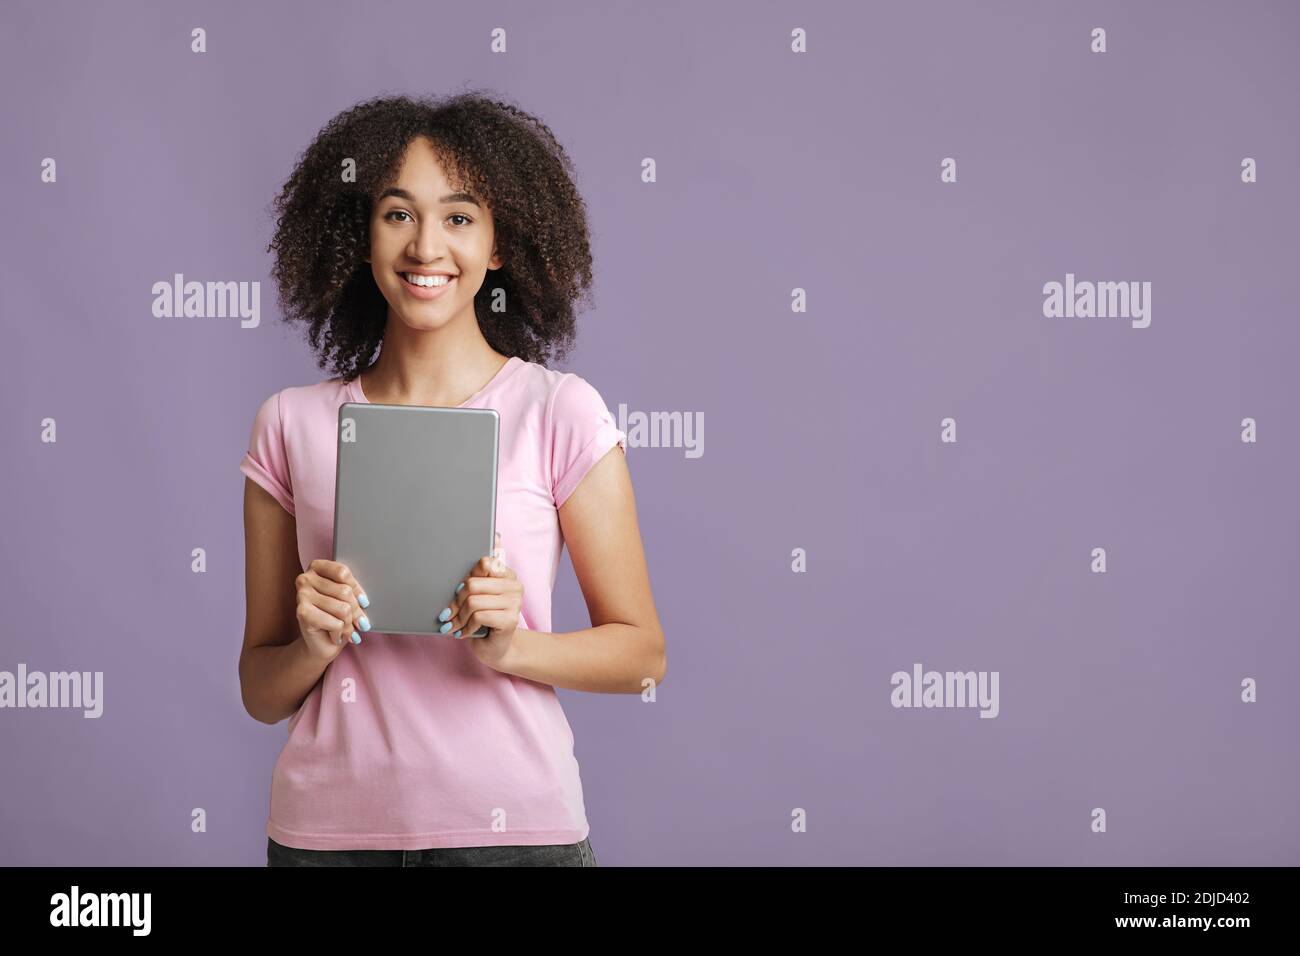 Positive expression and online win. Happy lady rejoices and holds digital tablet Stock Photo